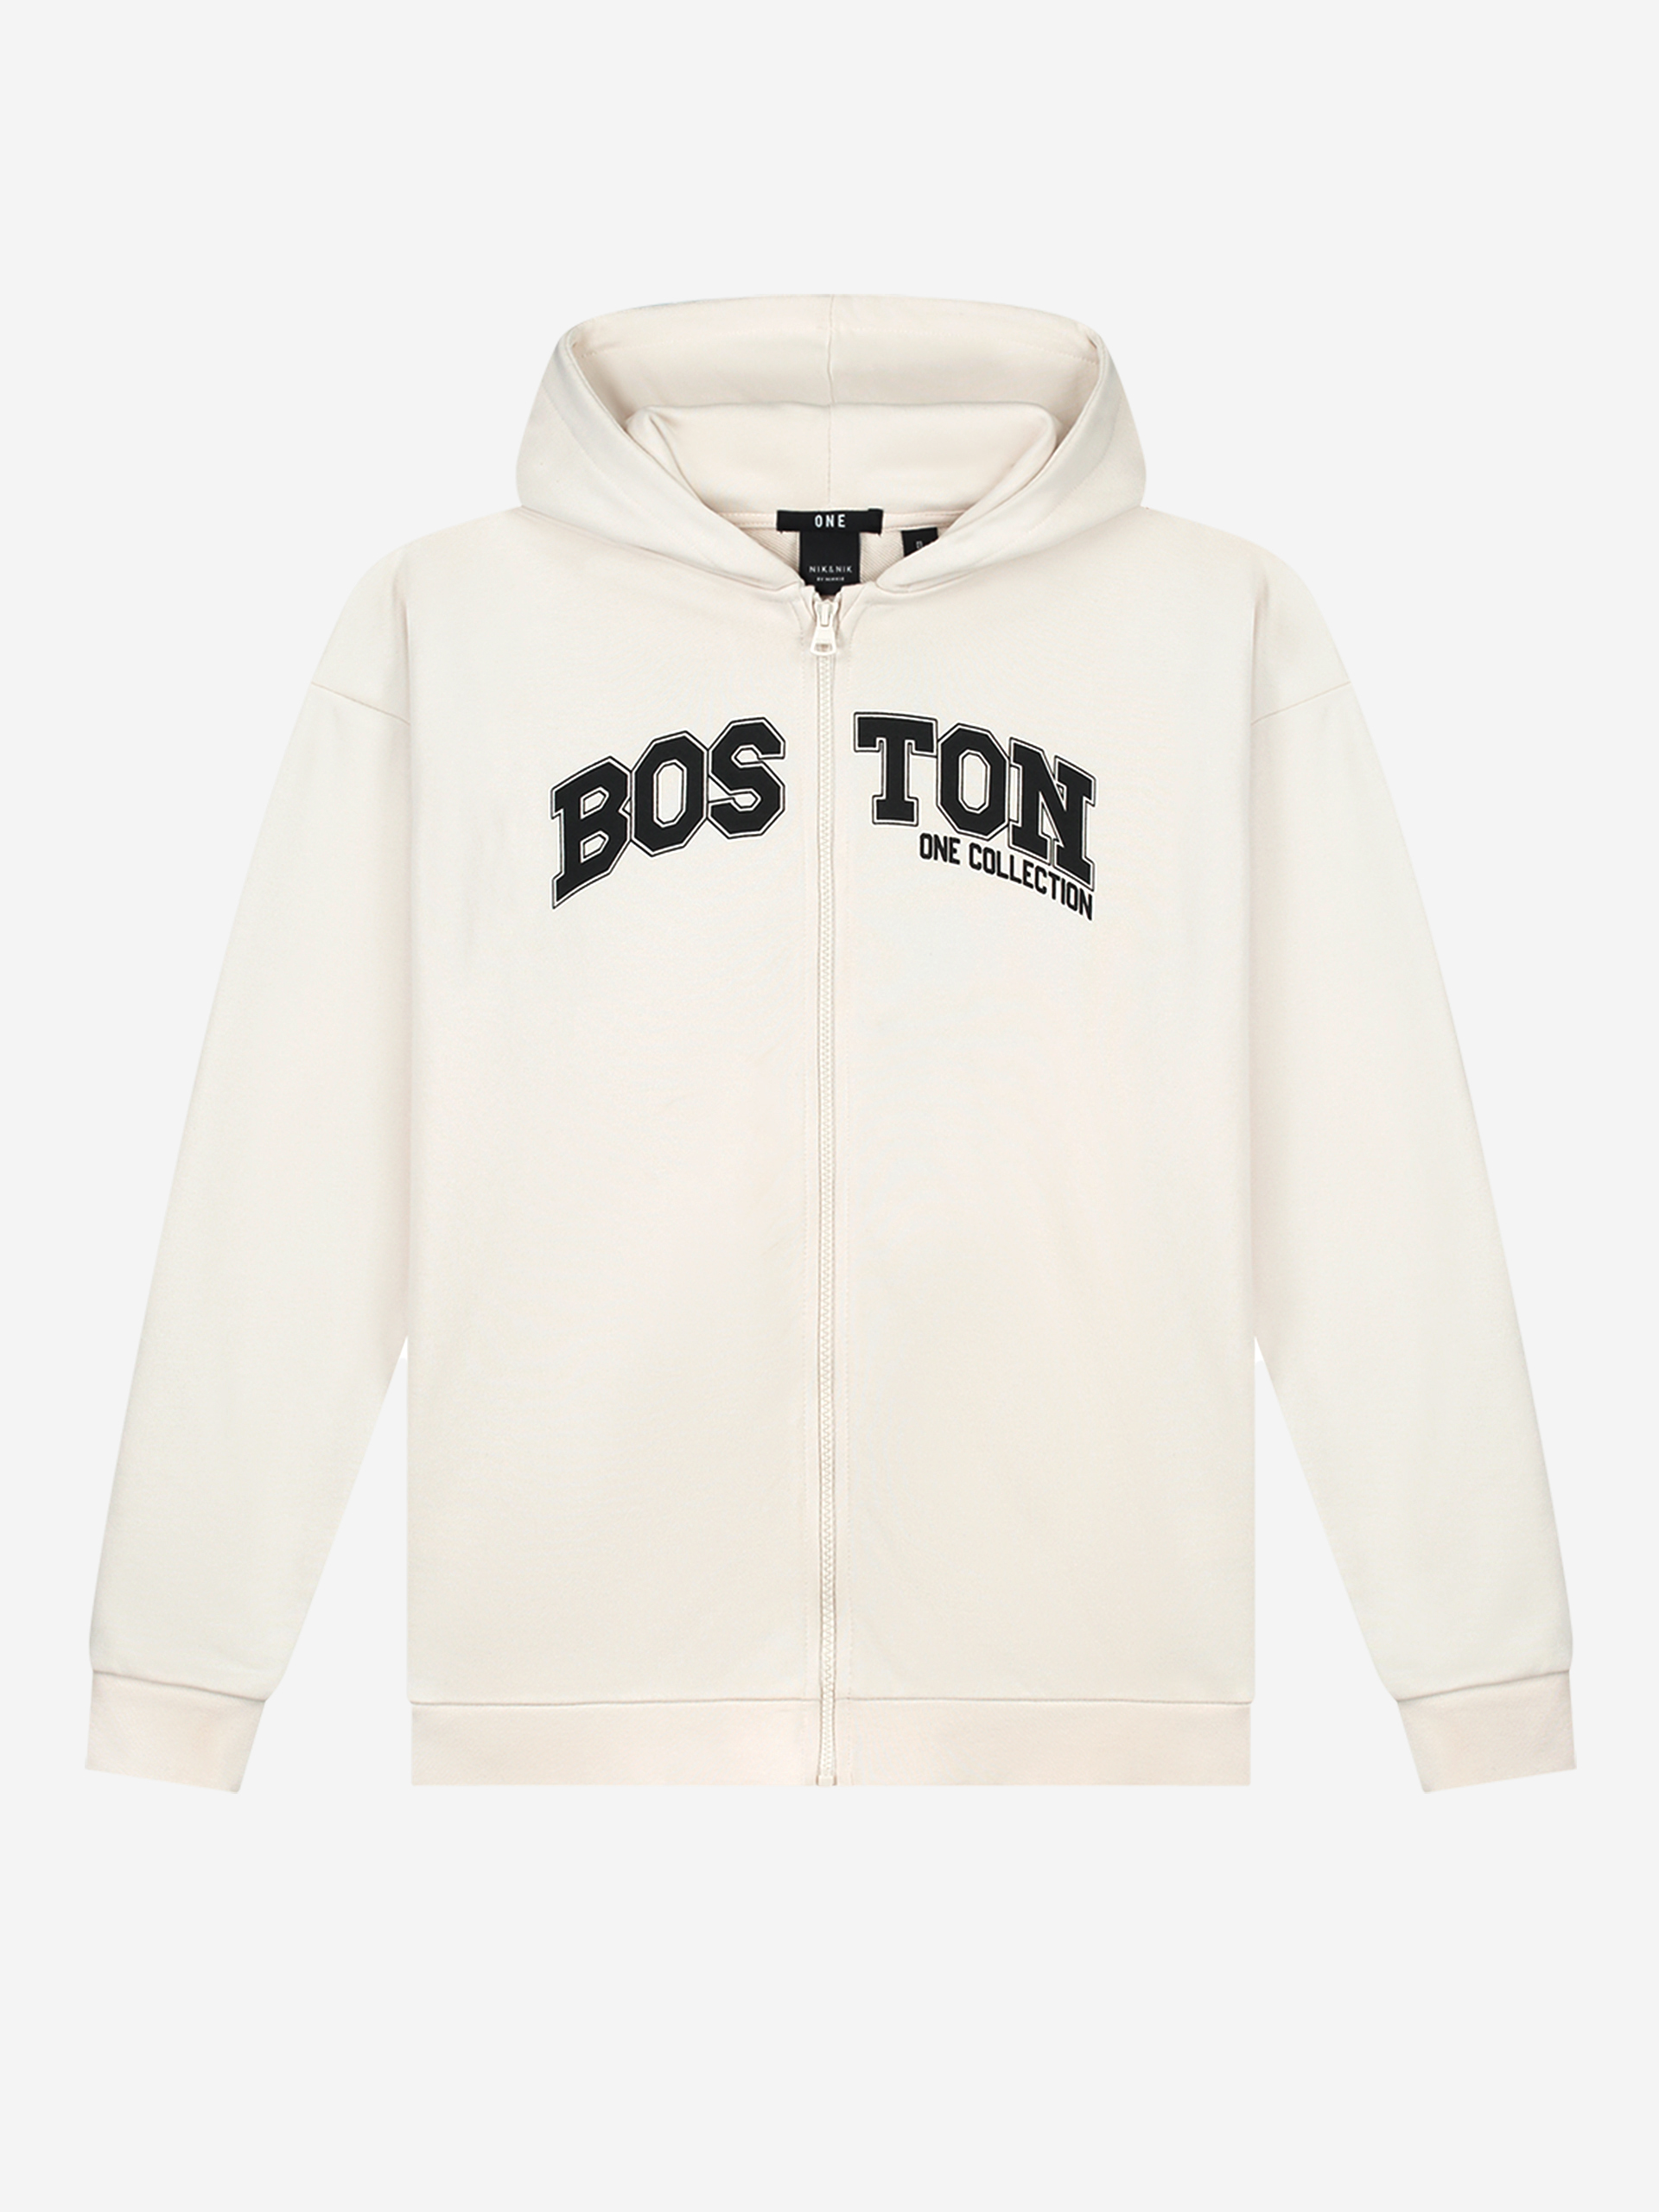 ONE COLLECTION zip Hoodie 